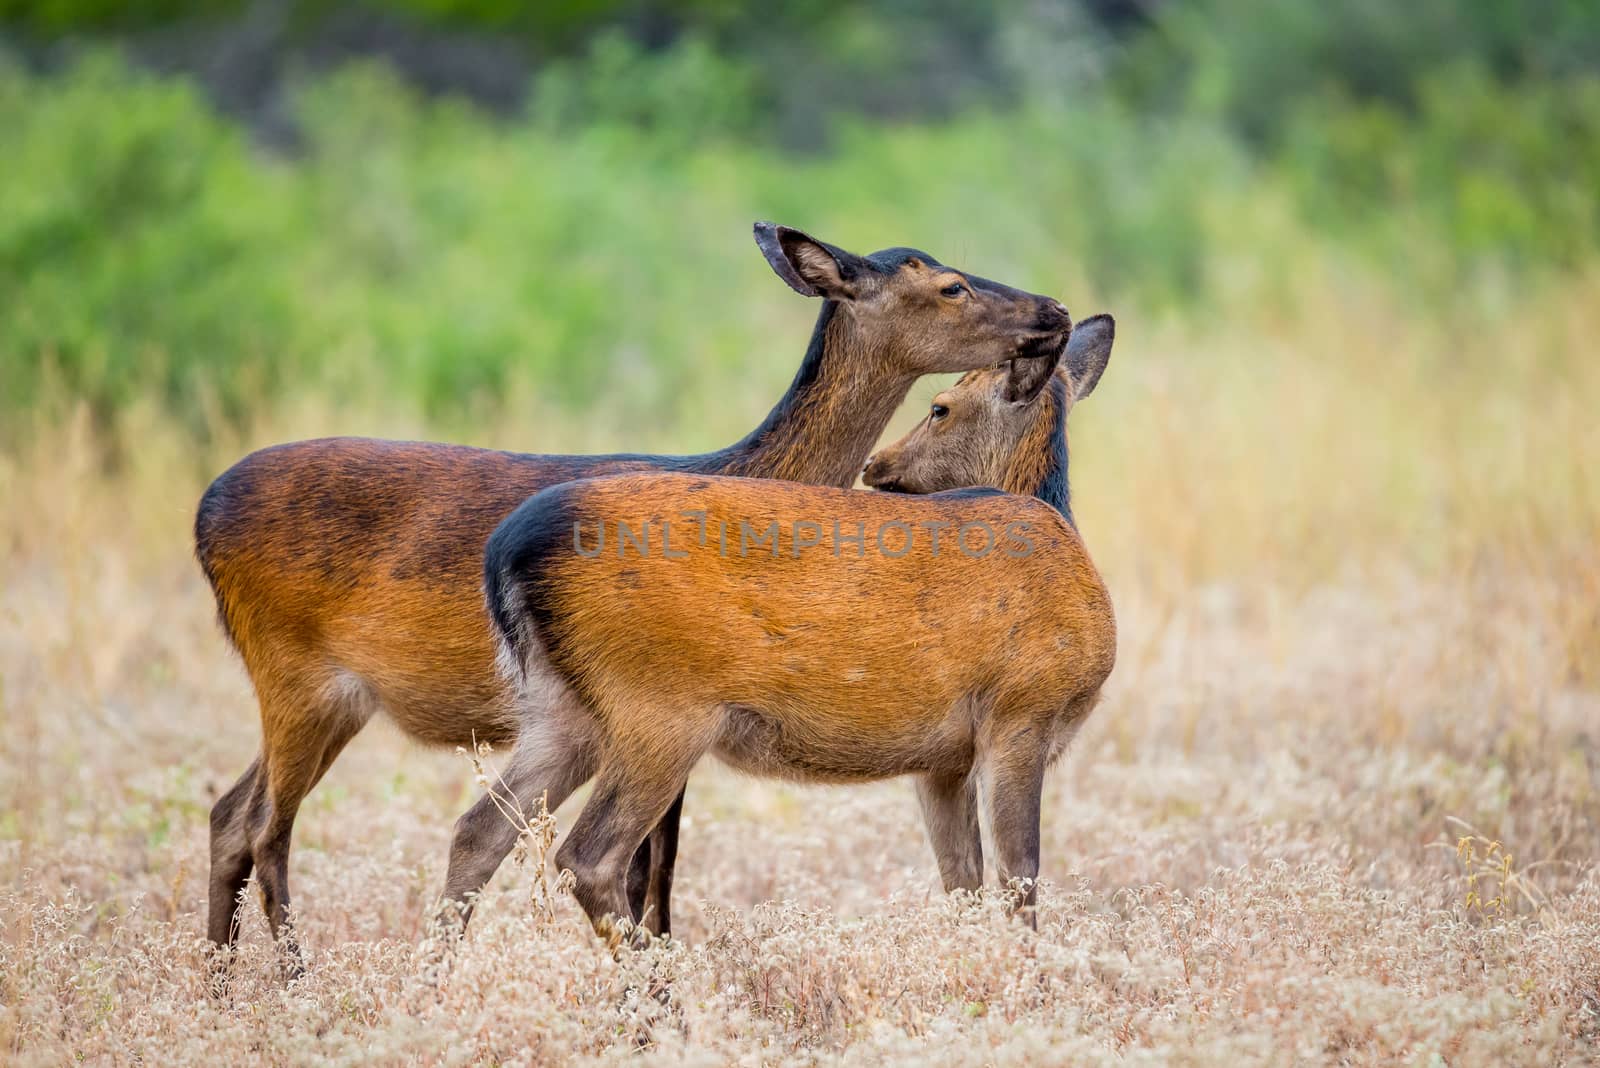 Young Wild South Texas Sika deer licking eachother. Also known as a Japanese or Spotted Deer.